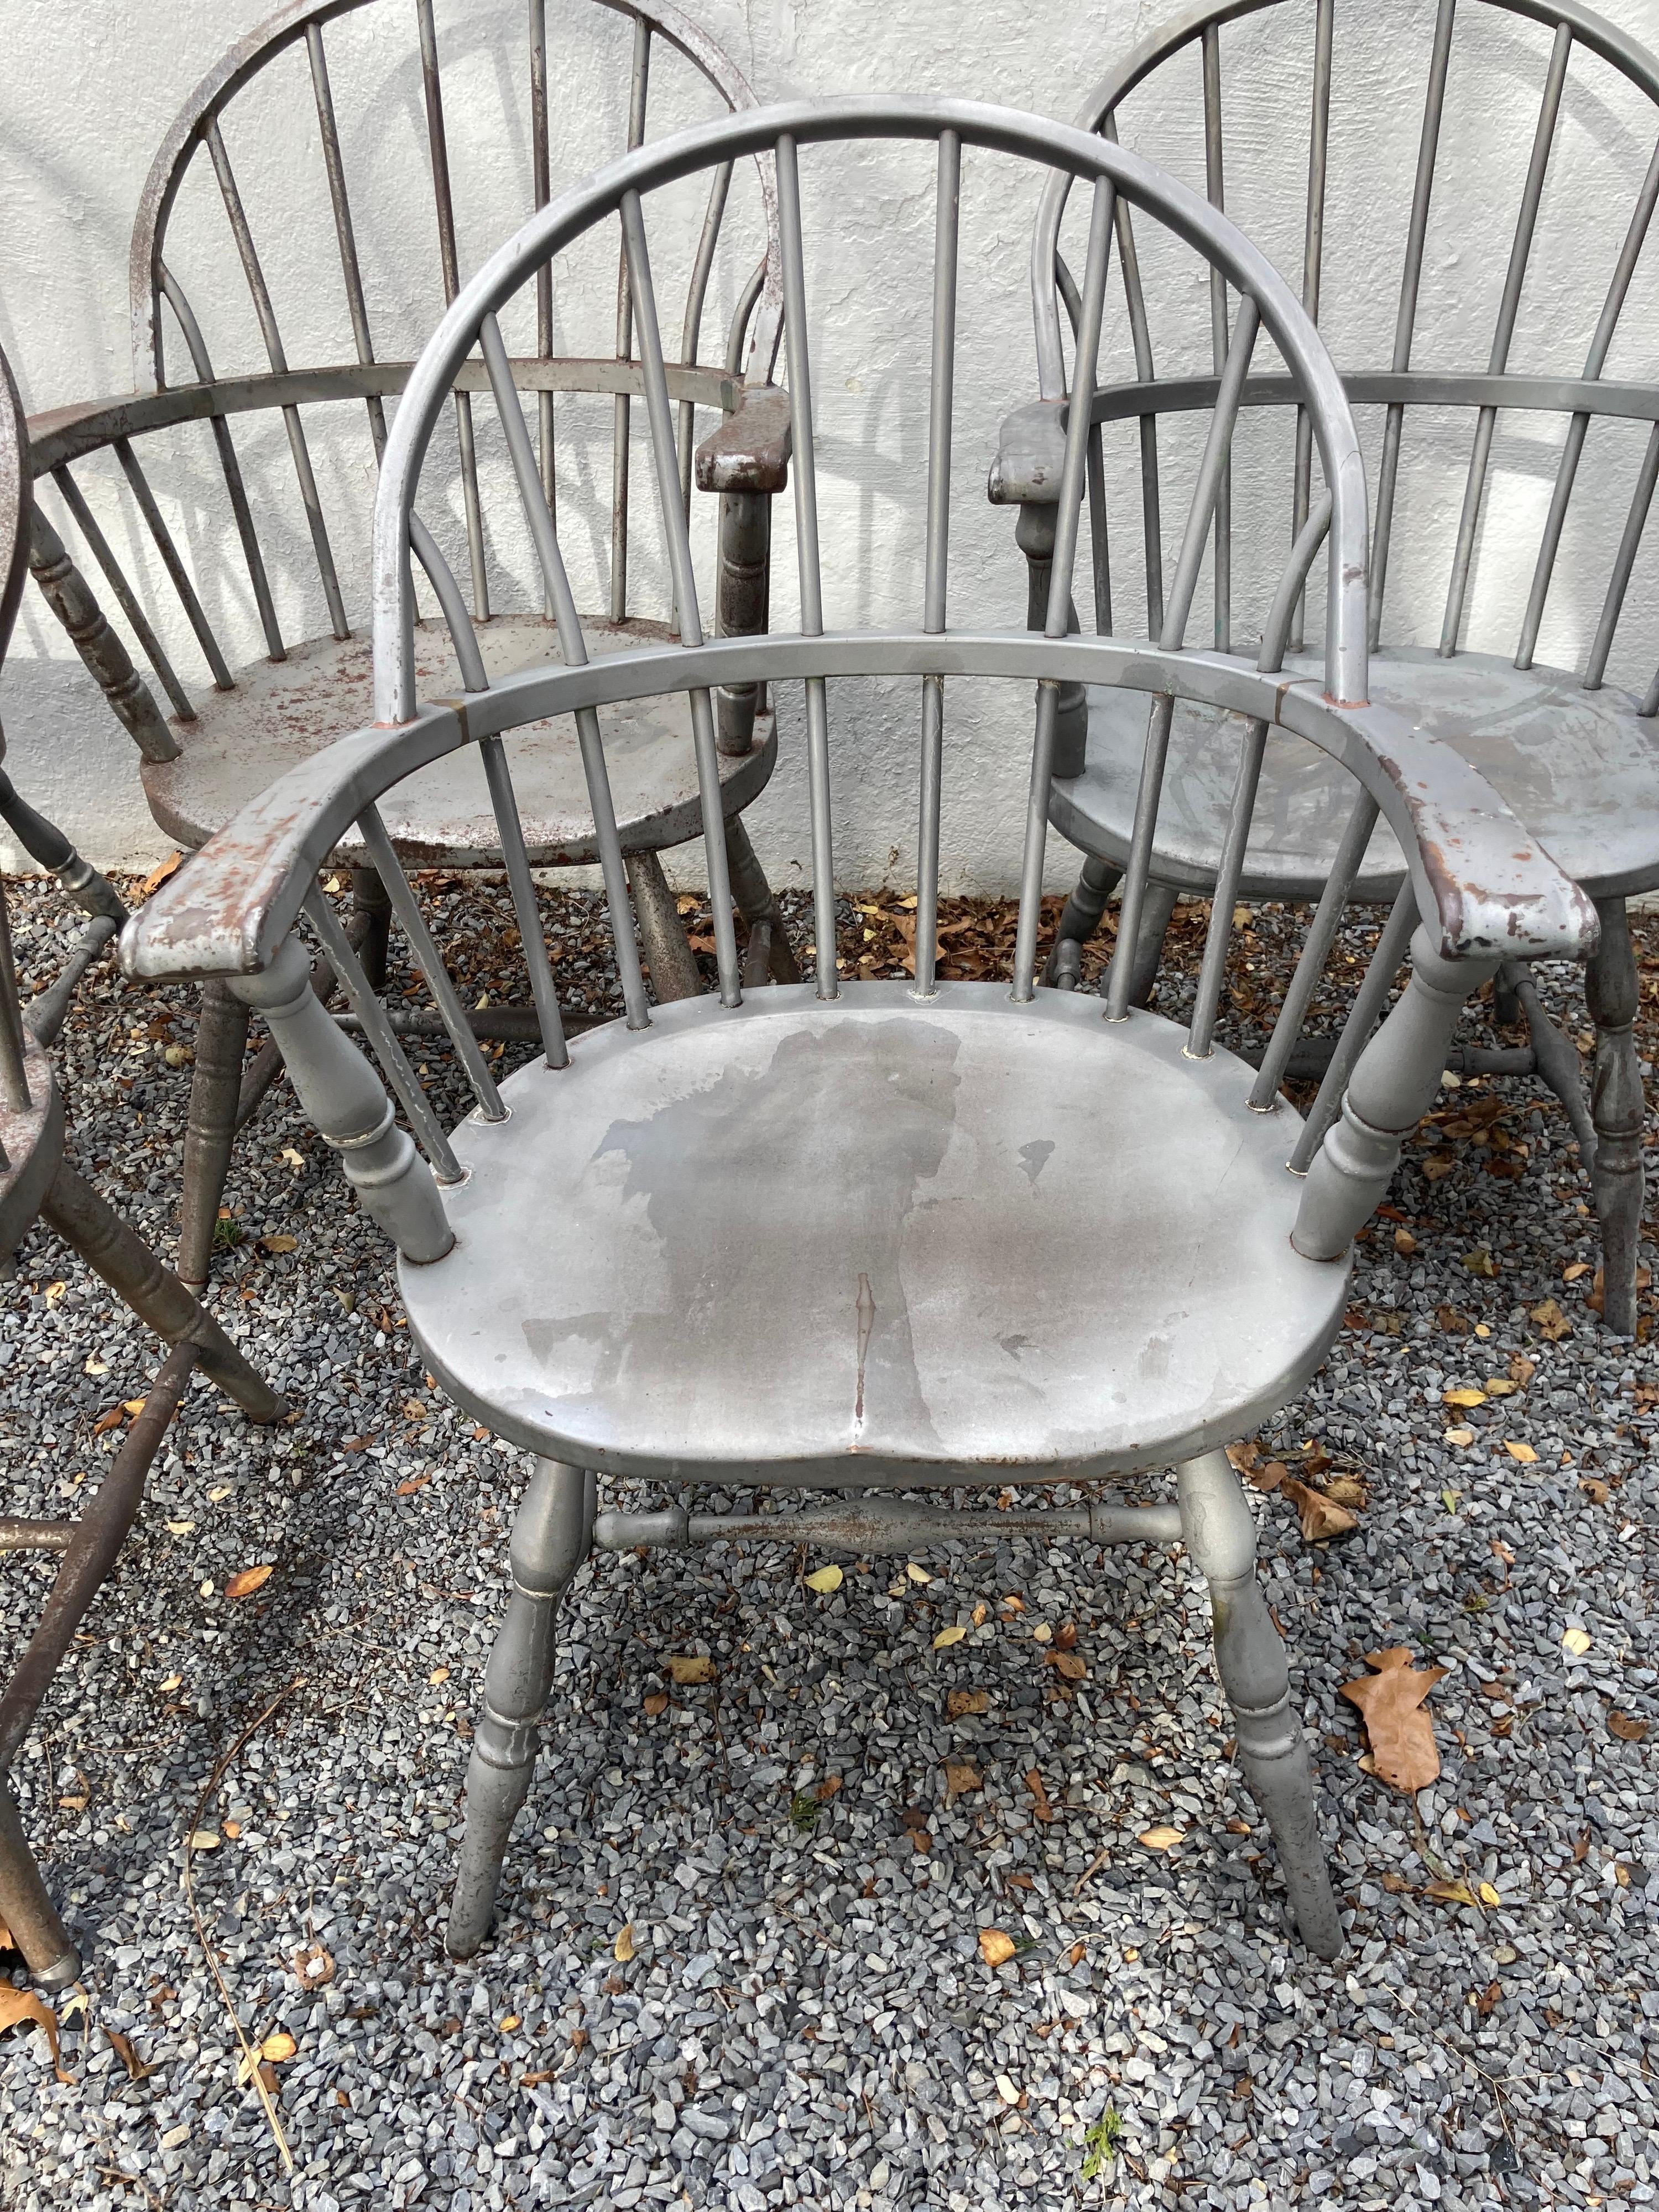 metal chairs for sale